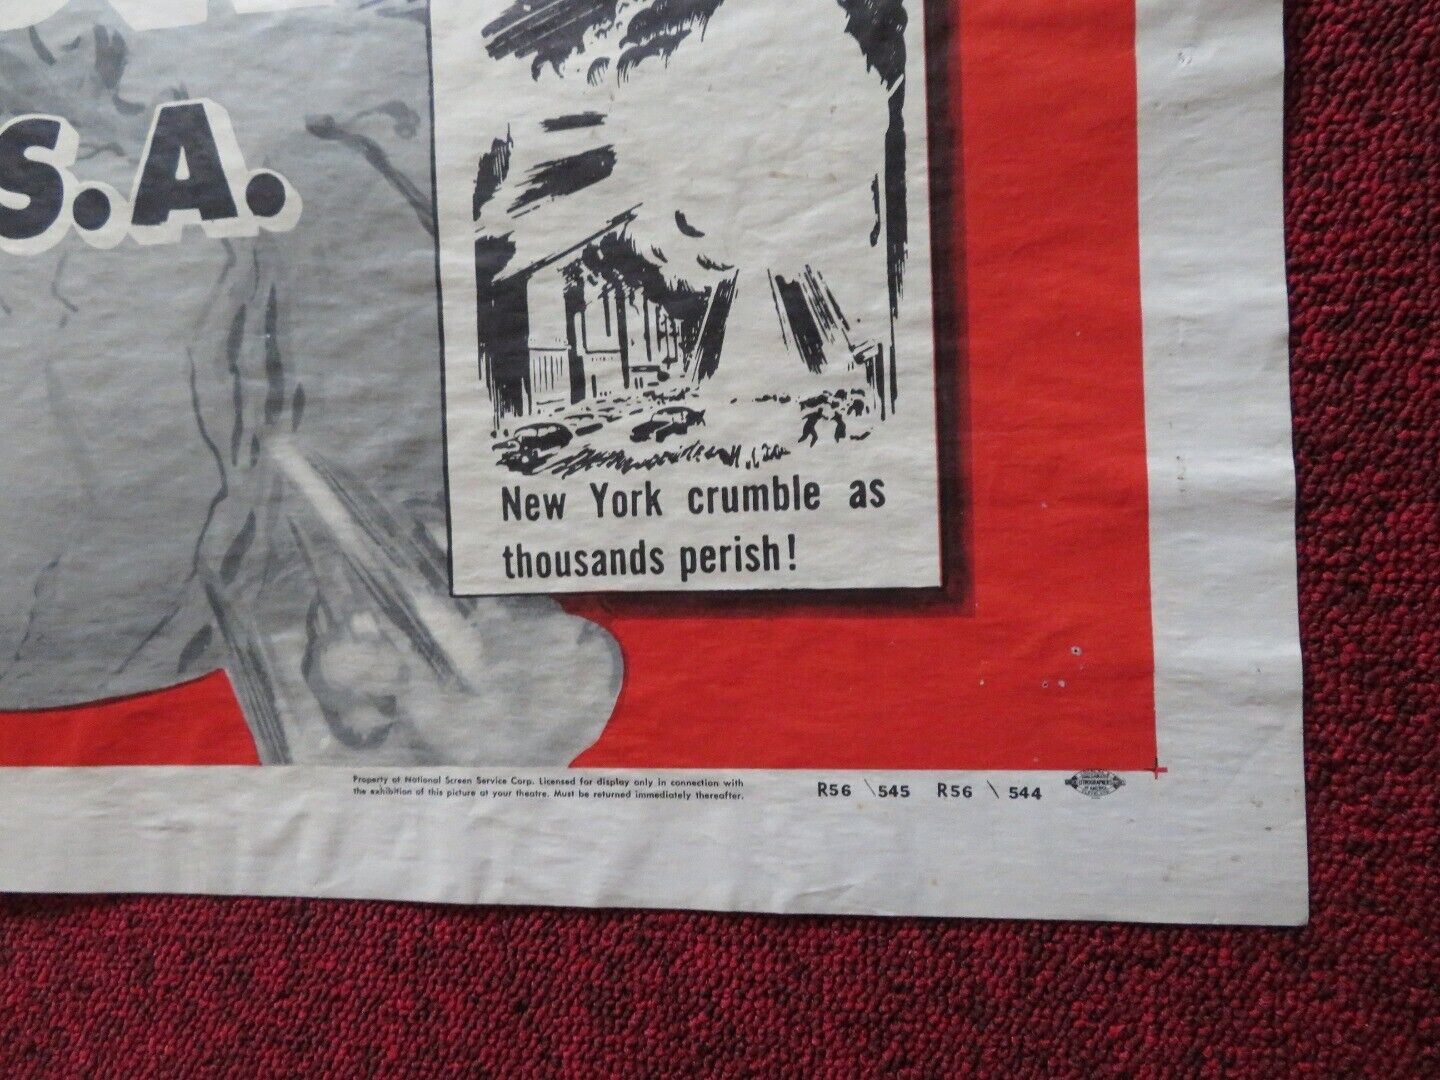 1000 YEARS FROM NOW / INVASION U.S.A. FOLDED US ONE SHEET POSTER 1956 R. CLARKE